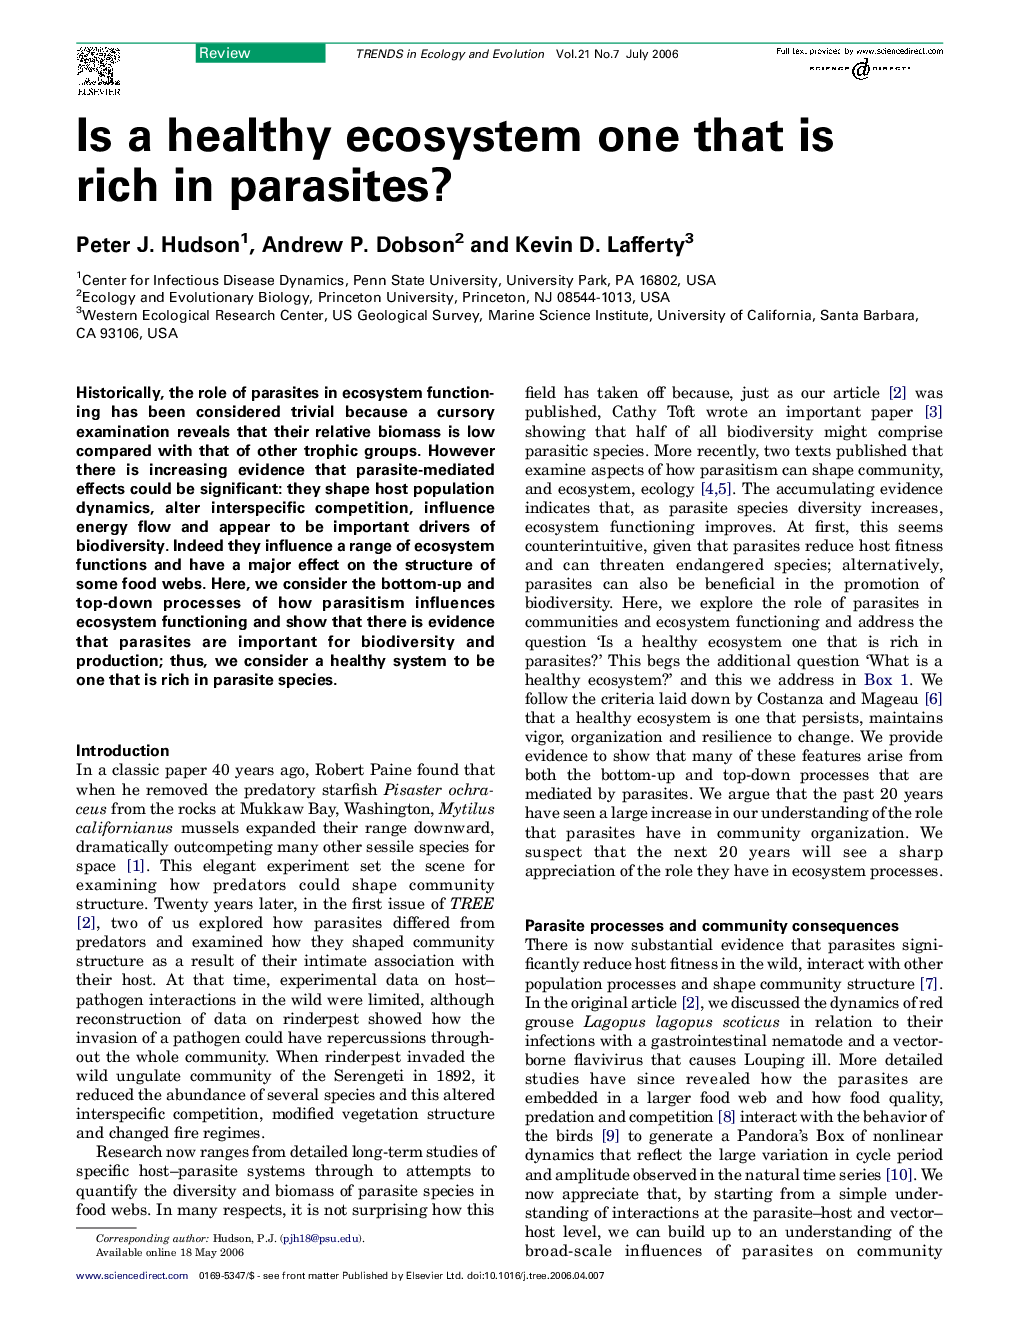 Is a healthy ecosystem one that is rich in parasites?